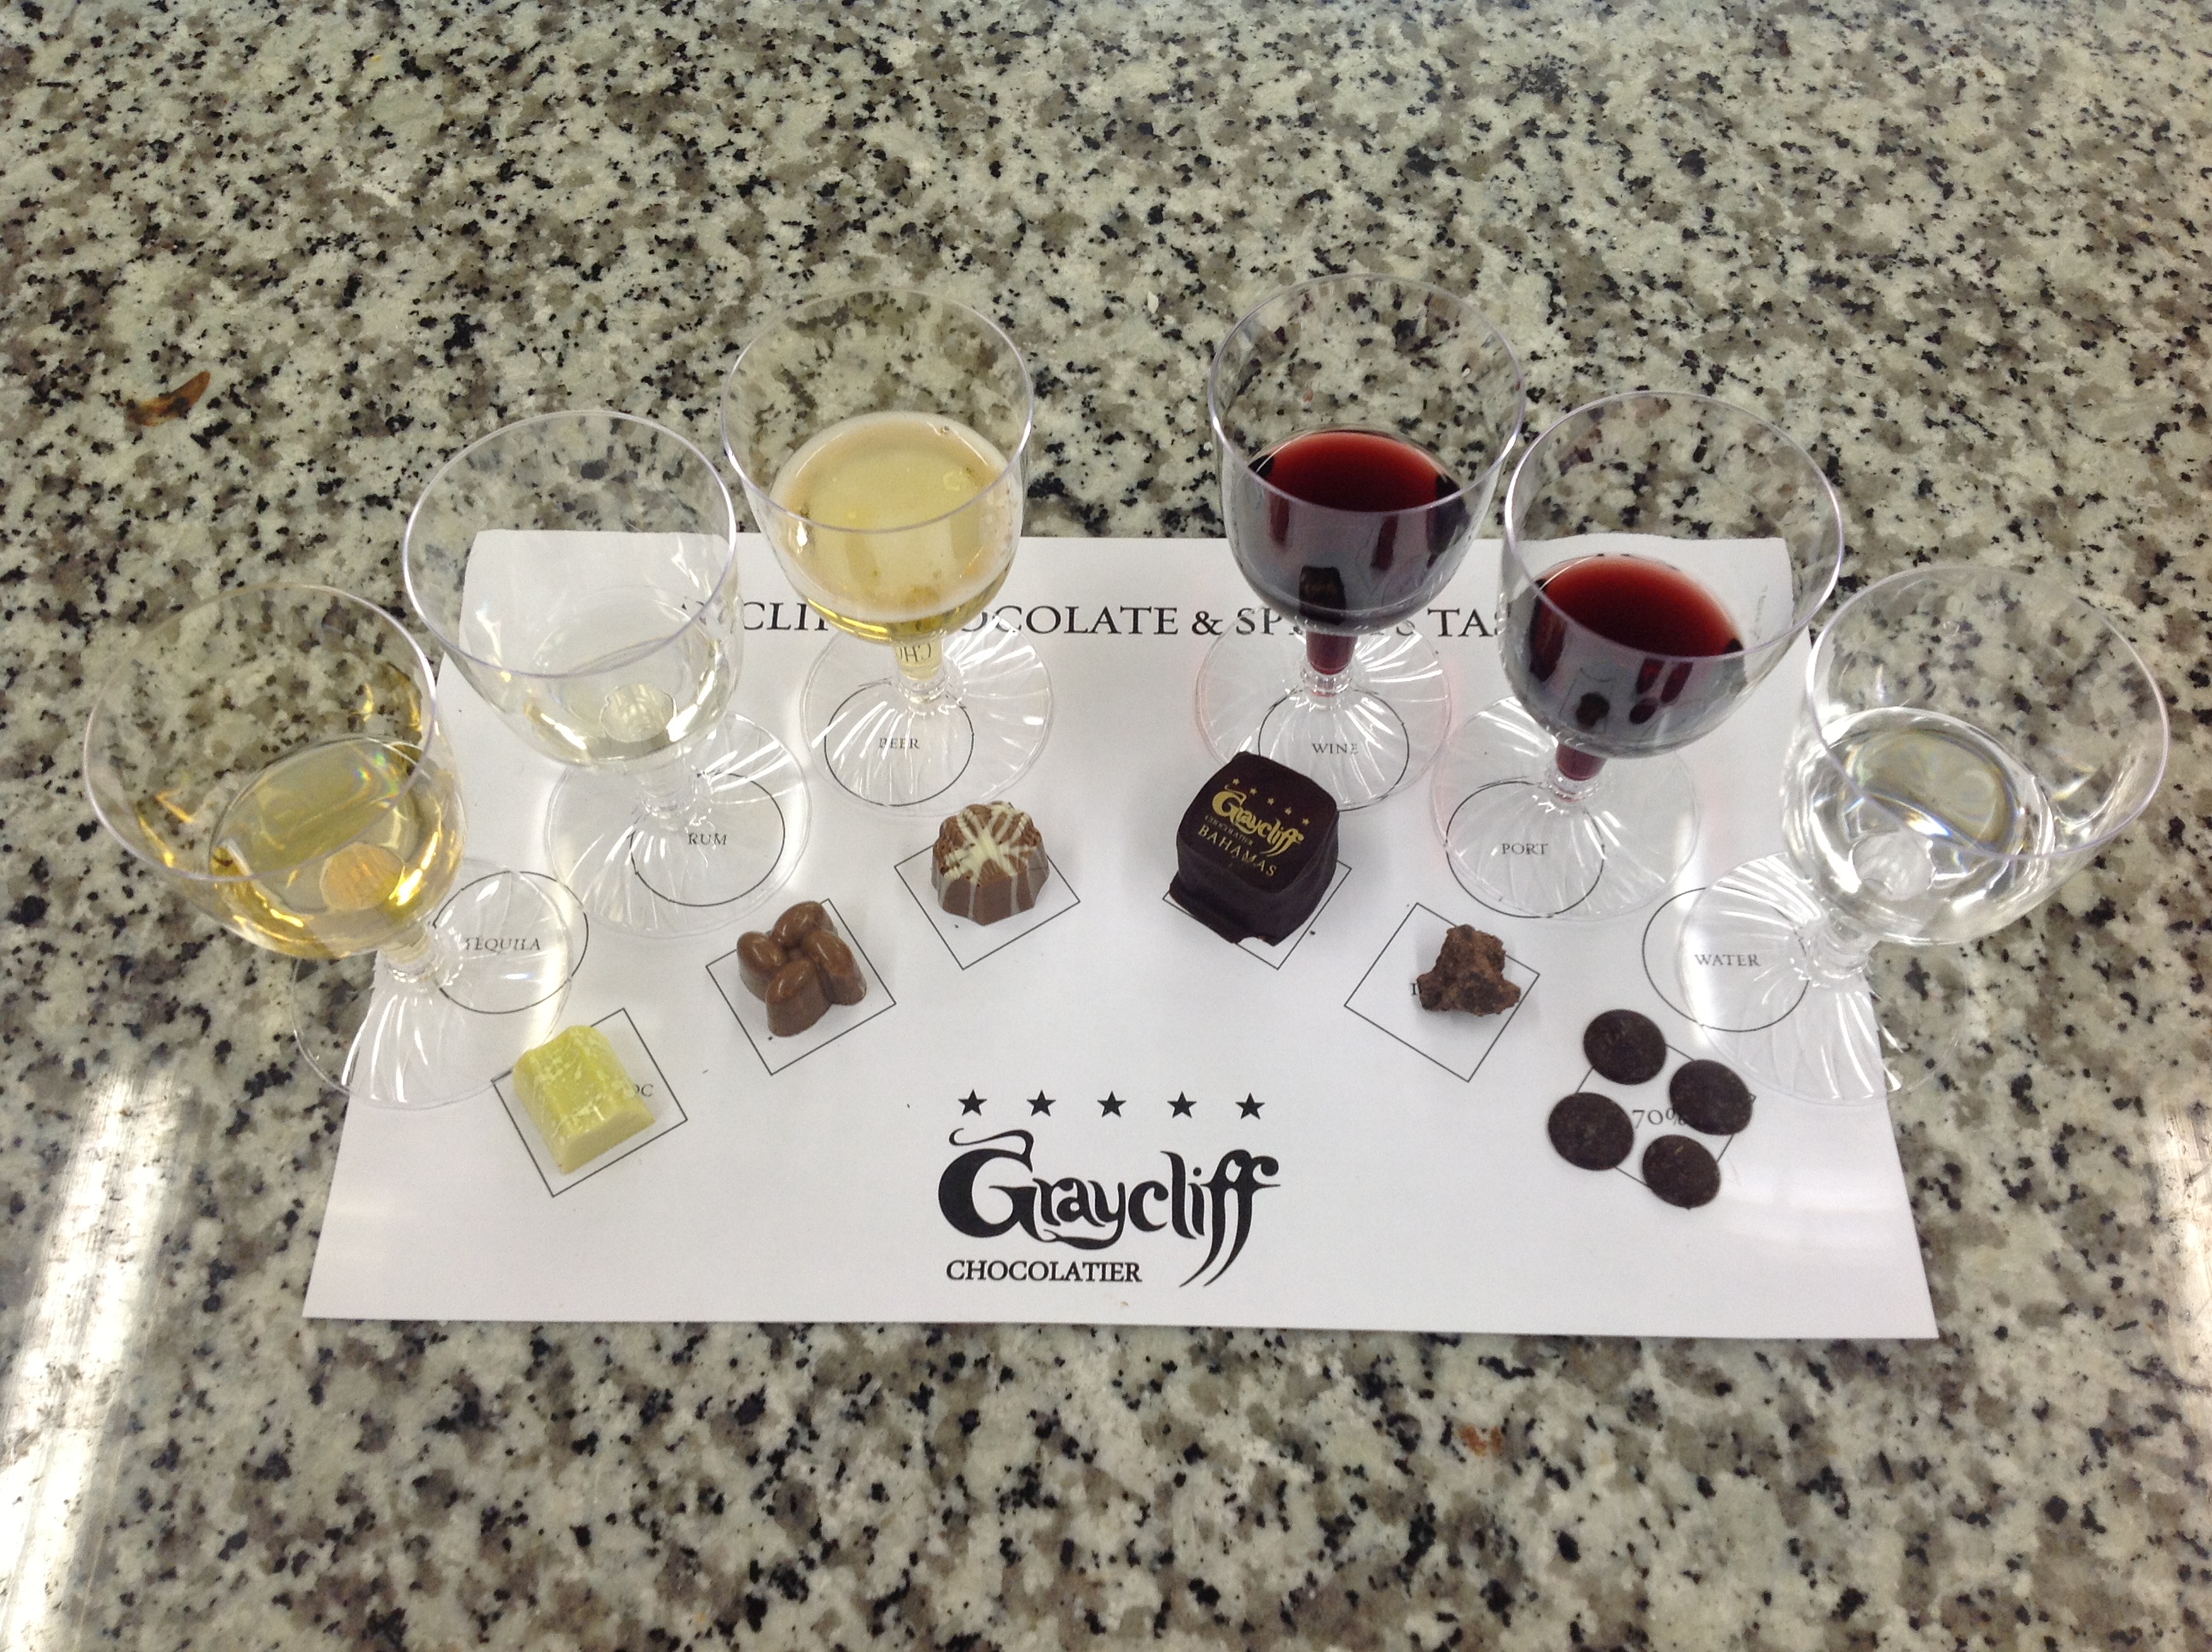 At the Chocolate & Spirits Pairing guests learn the secret of pairing chocolate with premium rum, whisky, port and more as well as the art of artisanal chocolate production.